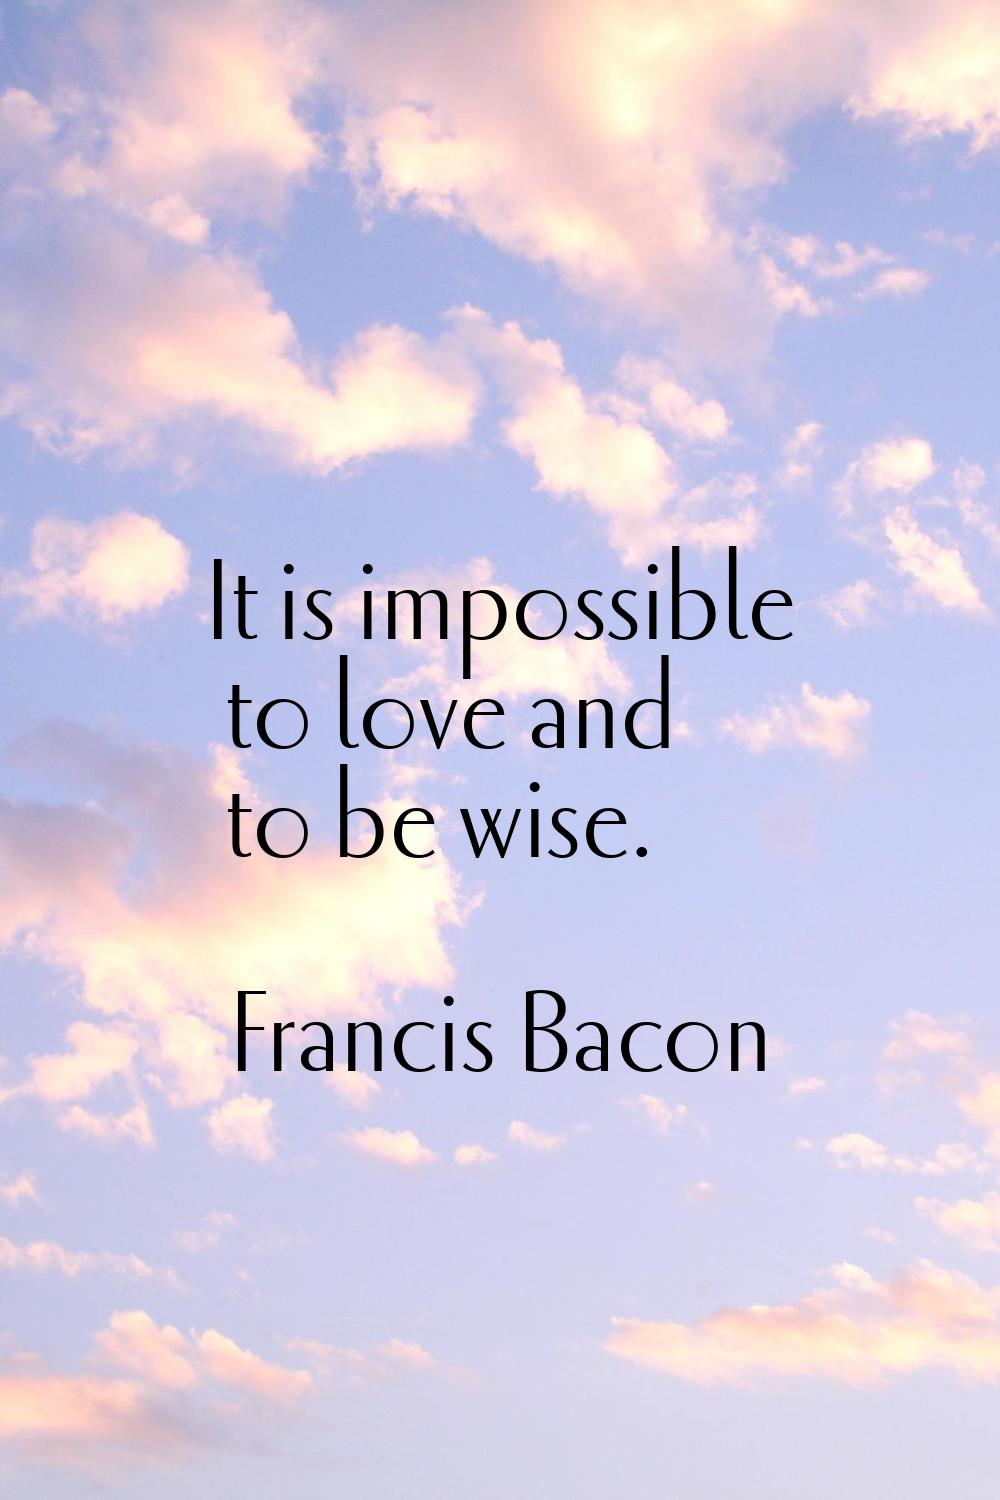 It is impossible to love and to be wise.